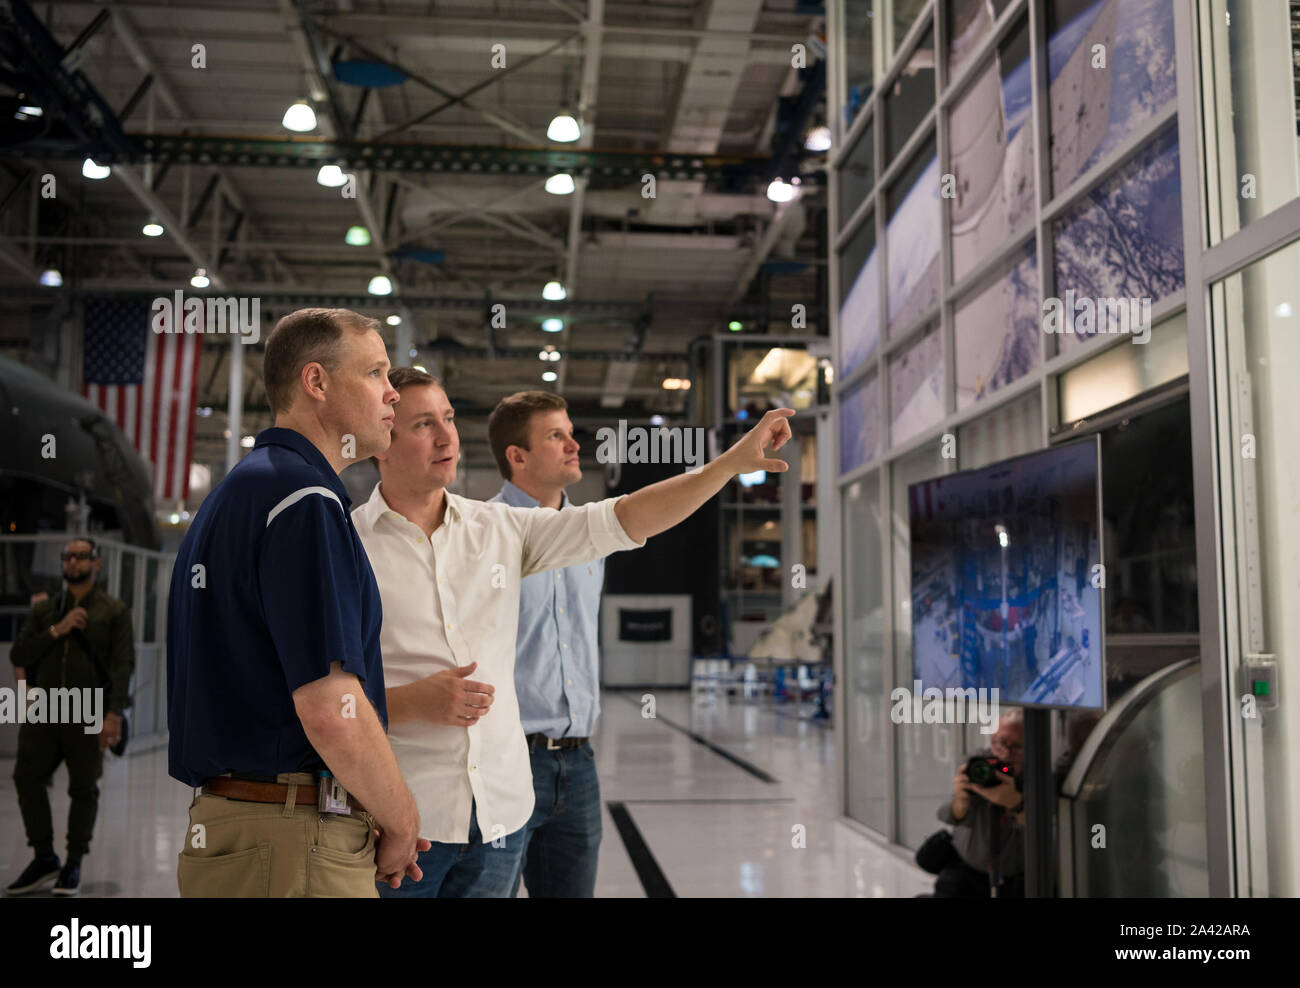 Hawthorne, United States. 11th Oct, 2019. NASA Administrator Jim Bridenstine, left, speaks to Joseph Petrzelka of SpaceX about the Crew Dragon capsule that will launch during the Demo-2 mission while on a tour of the SpaceX Headquarters on October 10, 2019, in Hawthorne, CA. NASA Photo by Aubrey Gemignani/UPI Credit: UPI/Alamy Live News Stock Photo